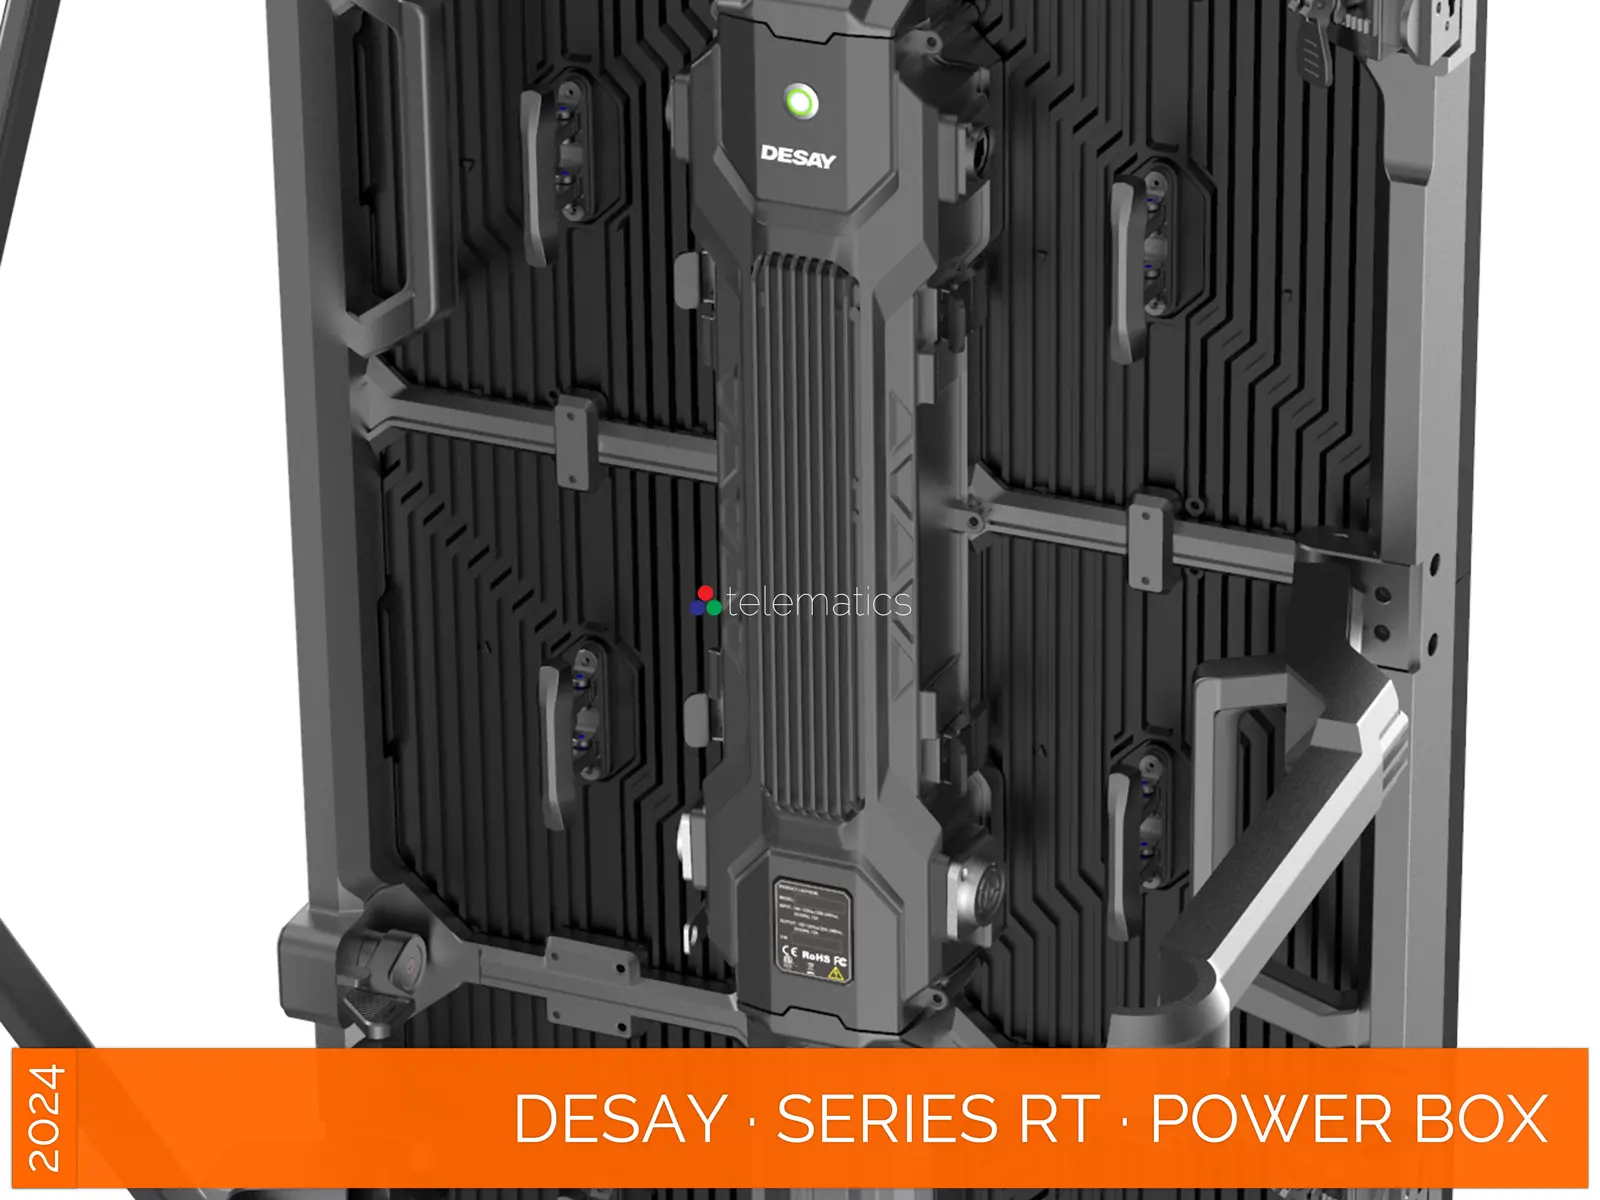 Desay · Series RT · Direct View LED Display Panel · Full Pixel Range · Rental Or Touring · Outdoor Rated · Rapid Service And Setup · Power Box With Front And Rear Service Access · NovaStar COEX MX CX · Vision Management Platform · Viplex · review · price · cost · priced from $1,790 per square meter